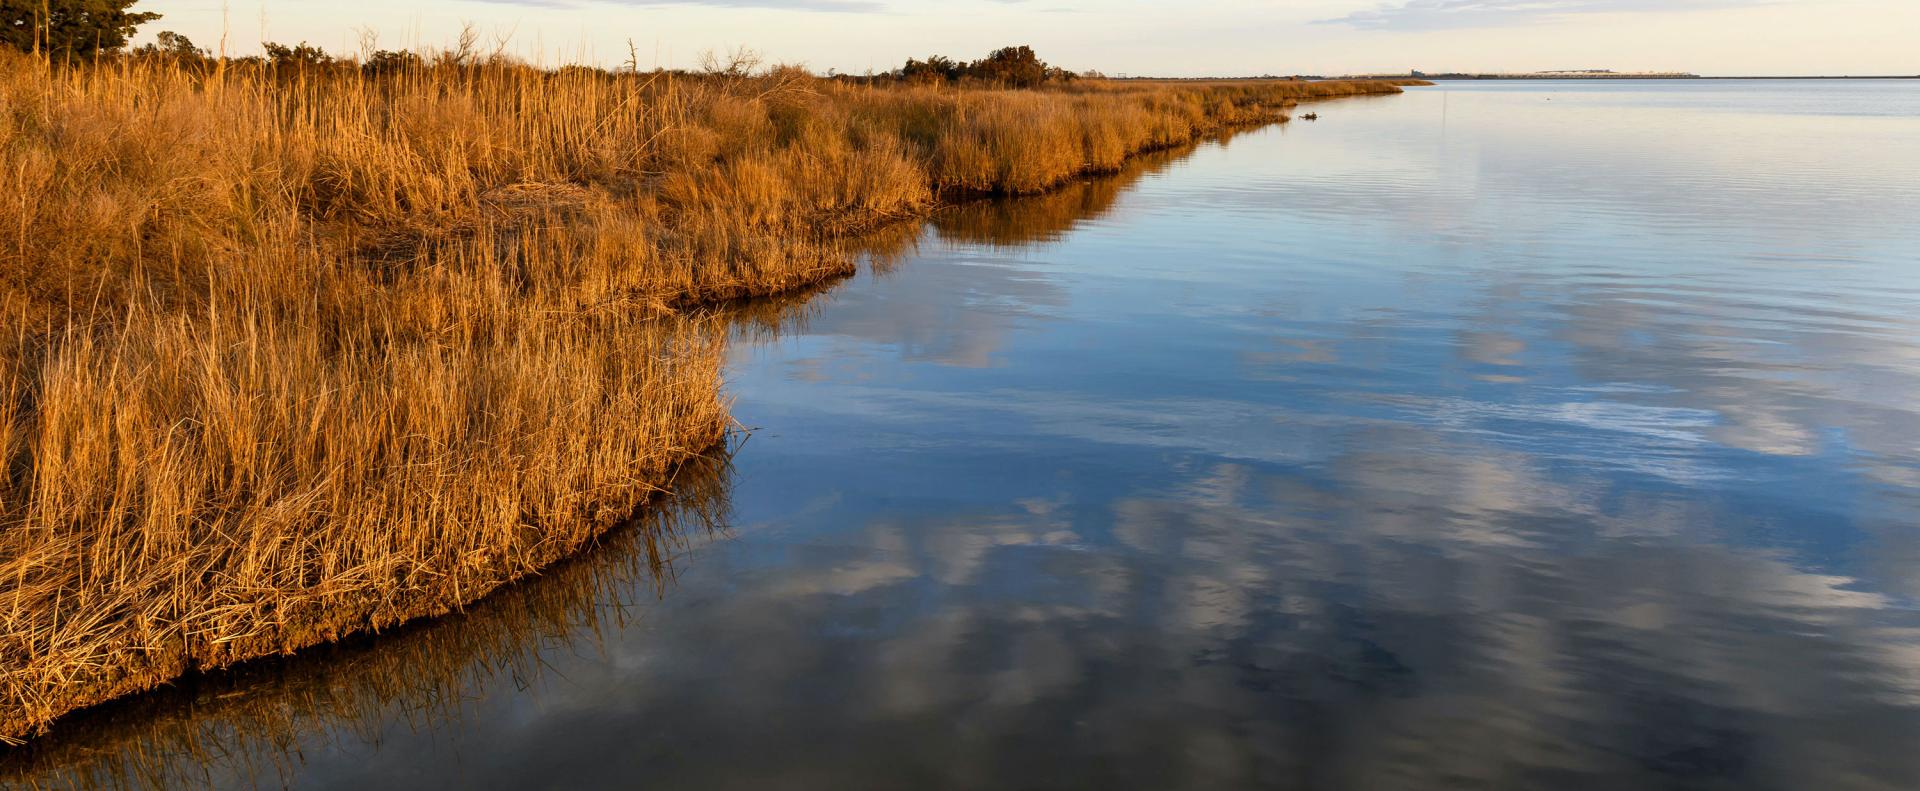 An ocean inlet with dry grasses along the water, representing drought. Photo credit: JuneJ, Shutterstock.